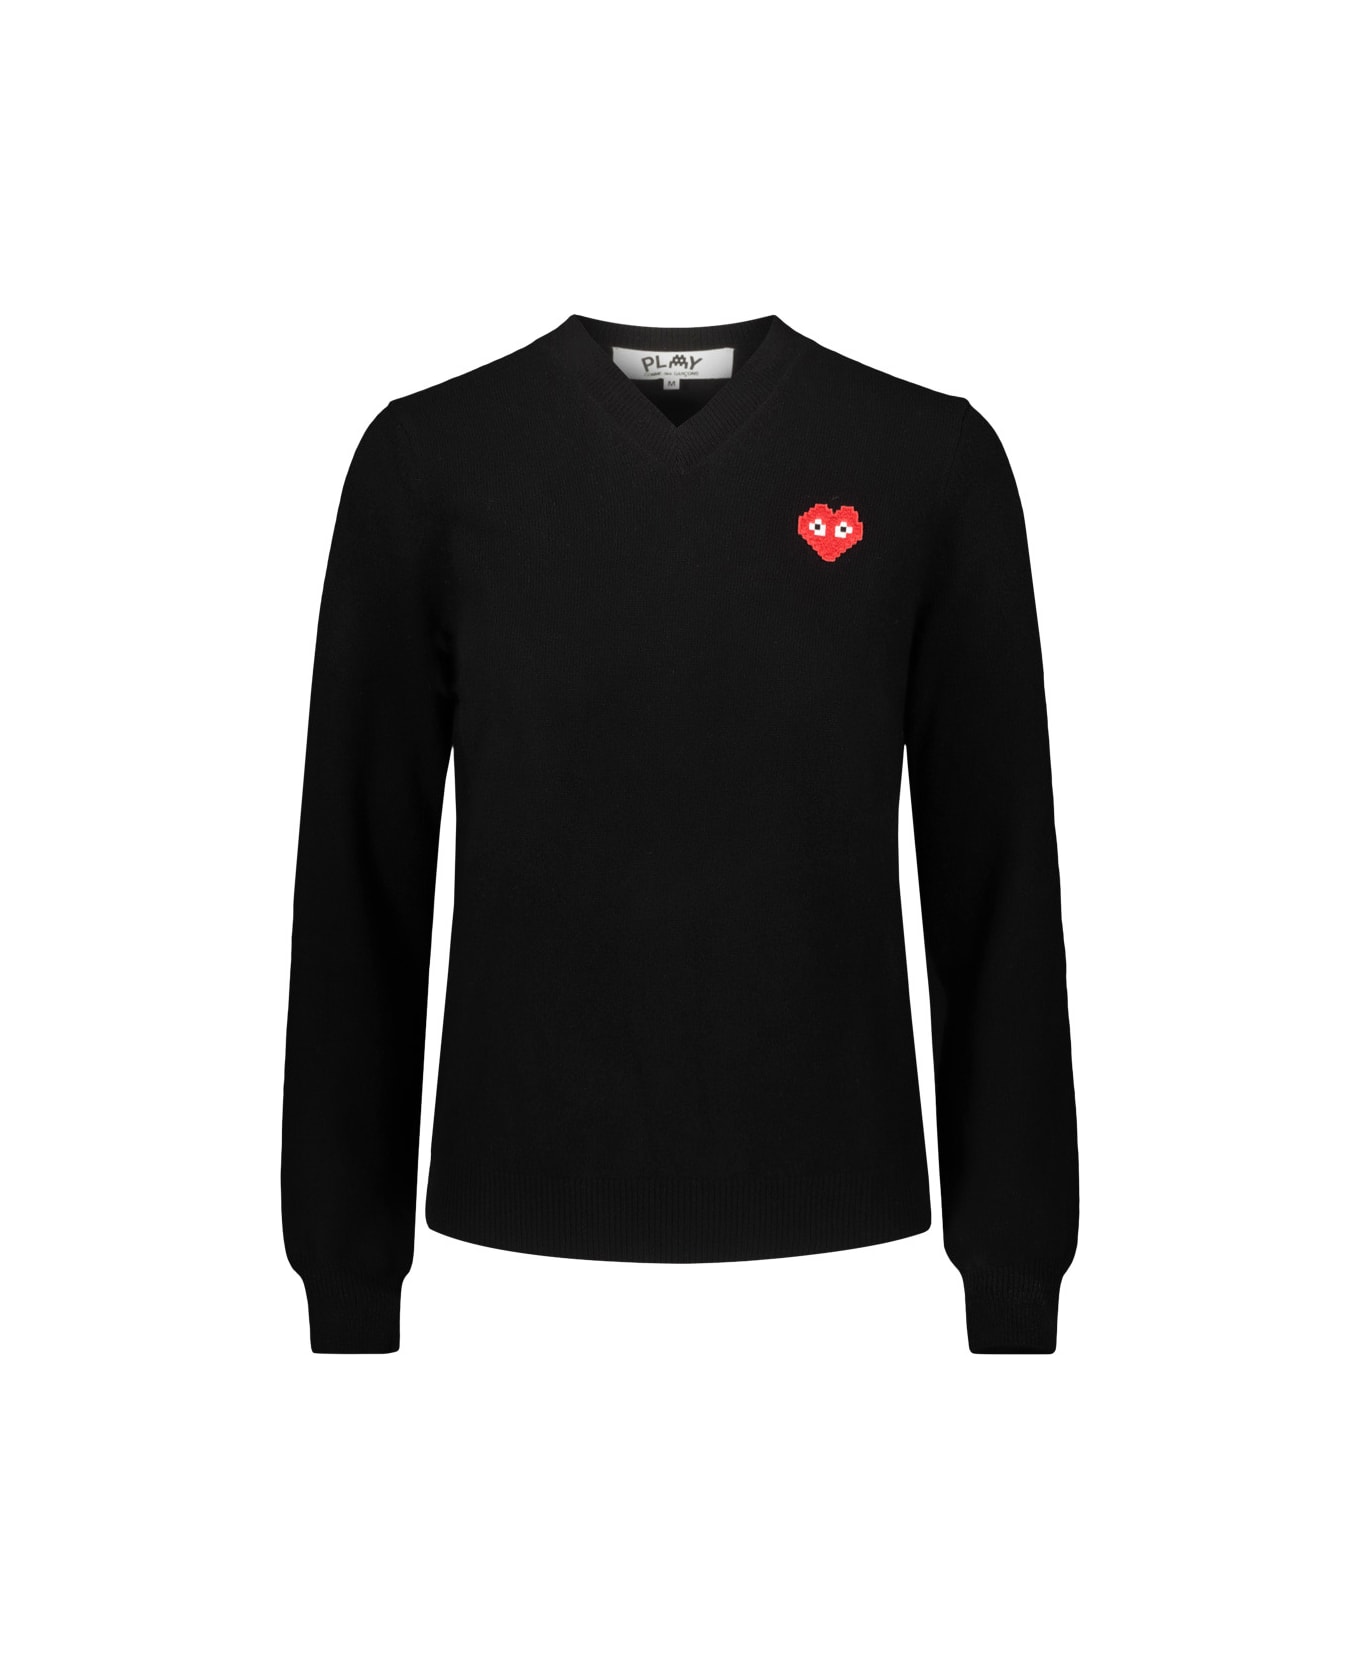 Comme des Garçons Play V-neck Sweater With Red Pixelated Heart - Blk